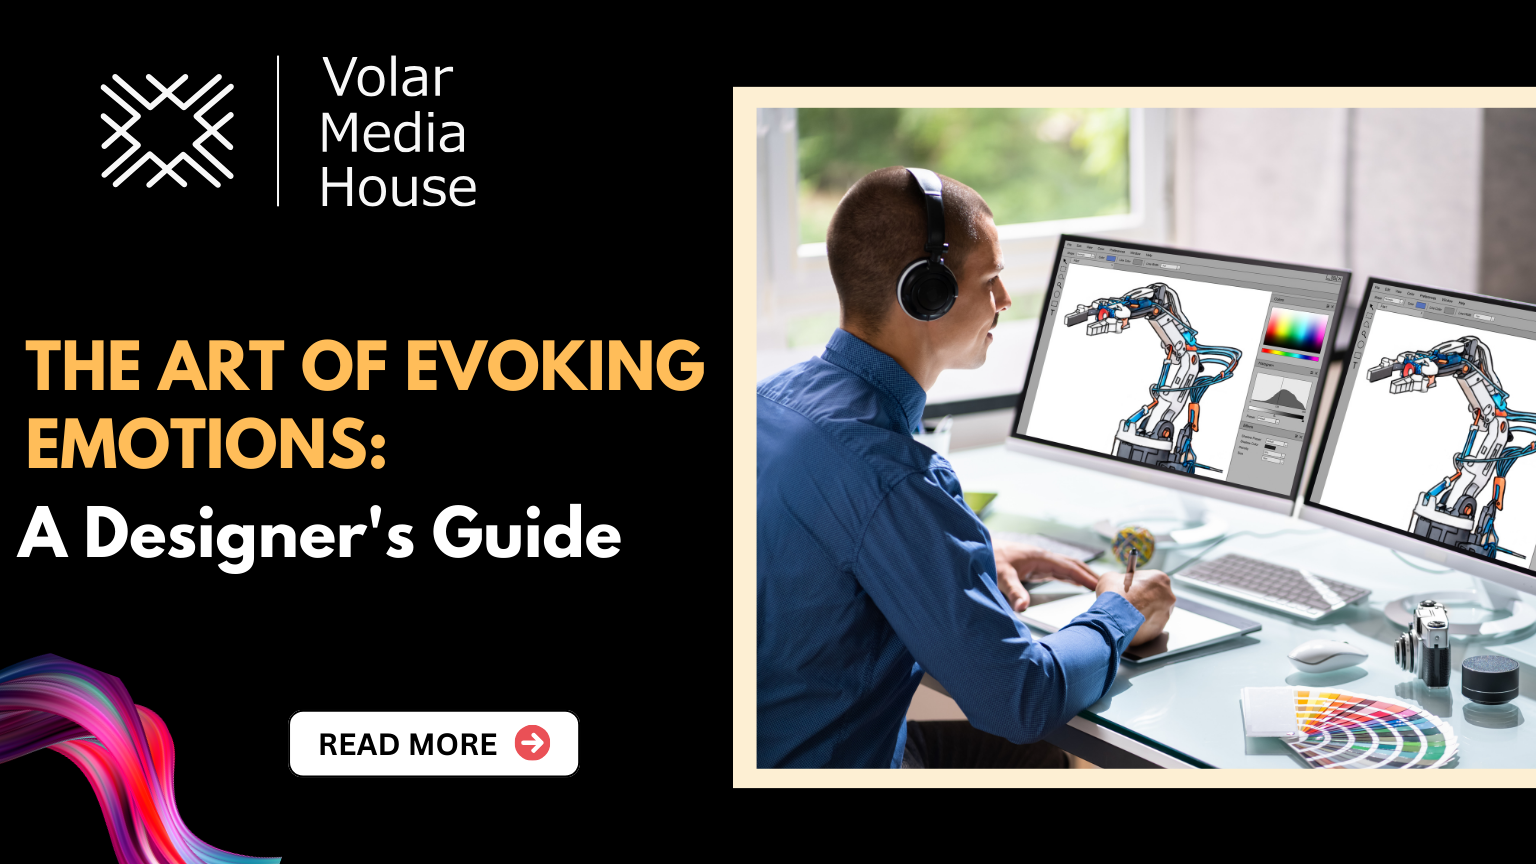 The Art of Evoking Emotions: A Designer’s Guide